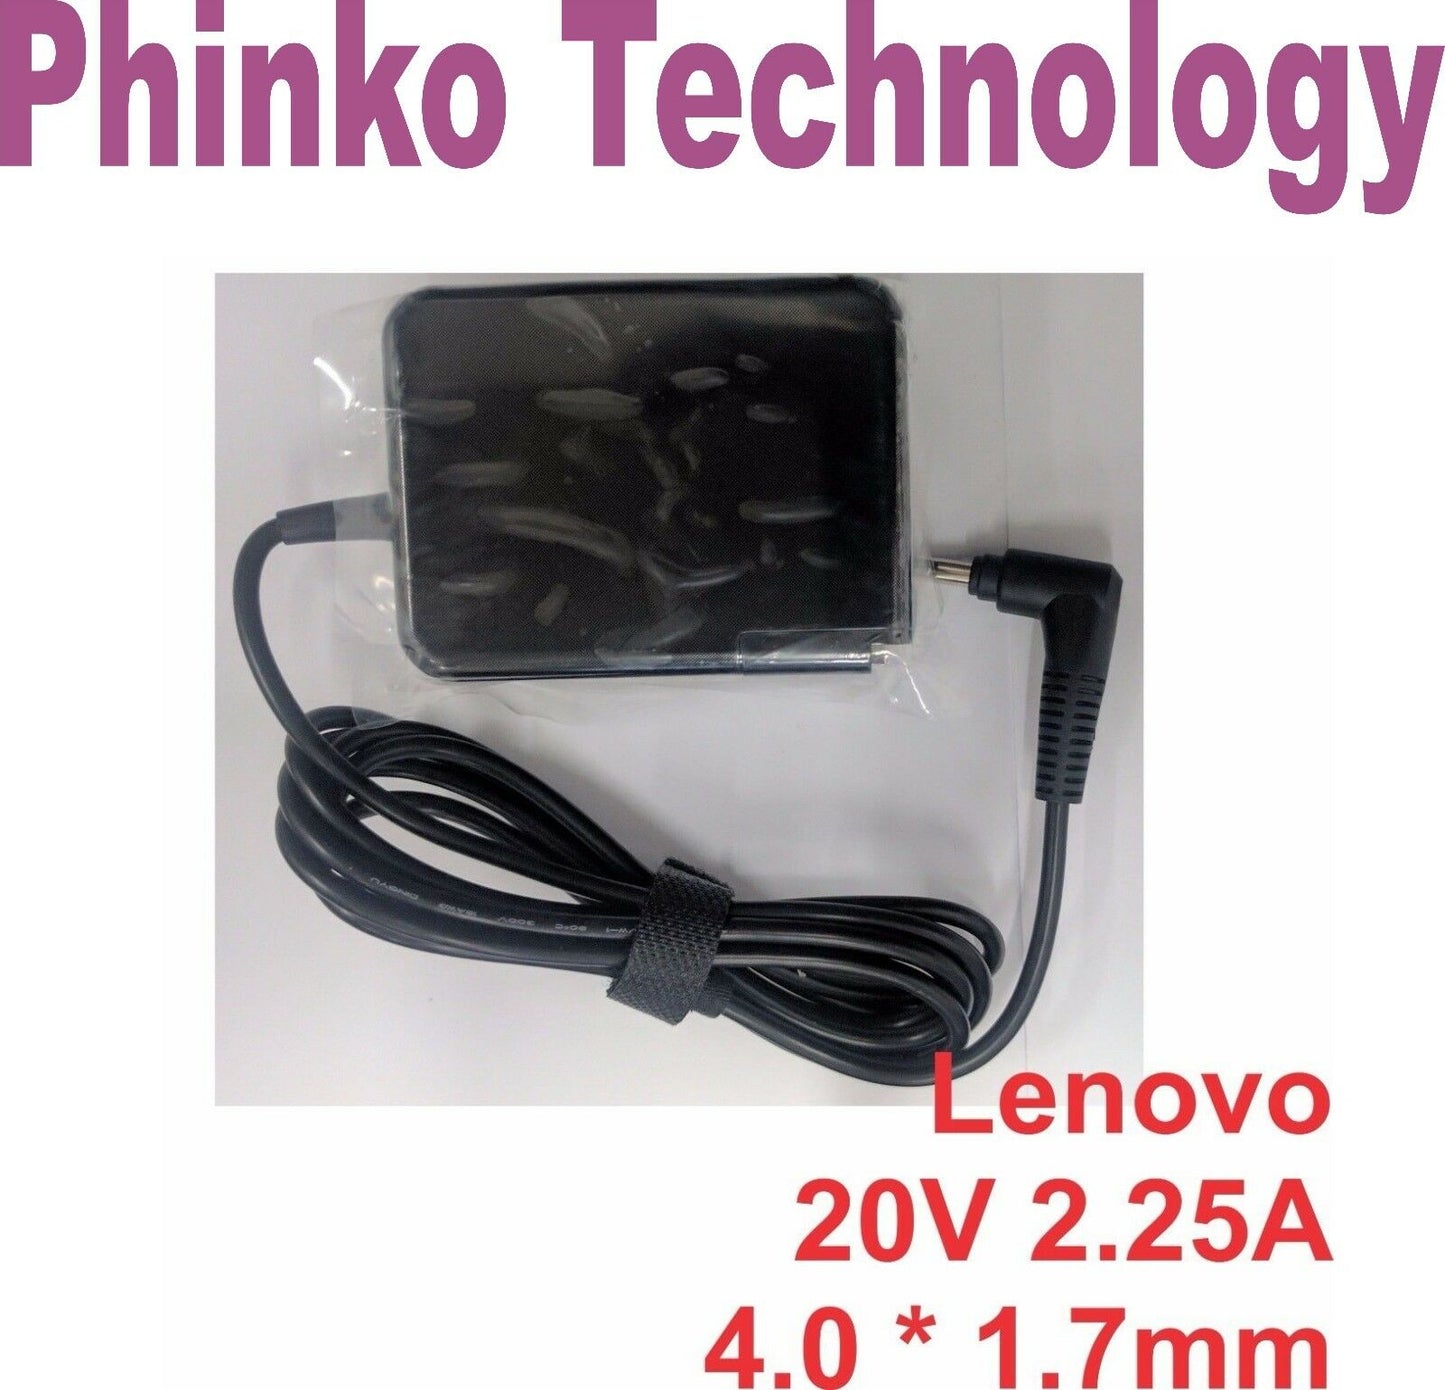 NEW Replacement charger for Lenovo ideapad 100-15IBD N23 80XL 20V 2.25A 45W